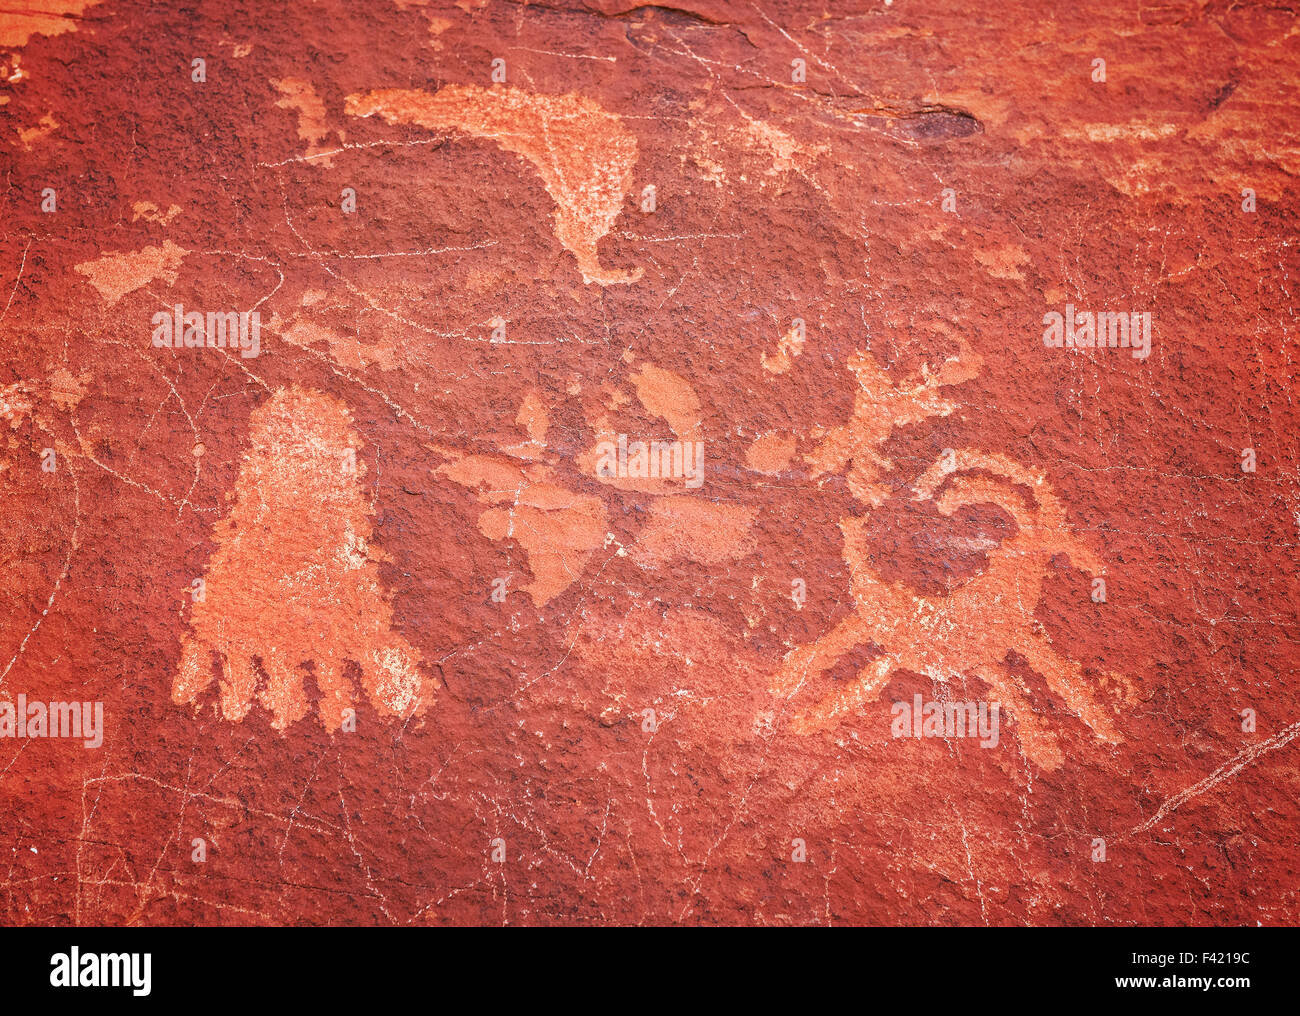 Ancient petroglyphs in Valley of Fire State Park, Nevada, USA. Stock Photo